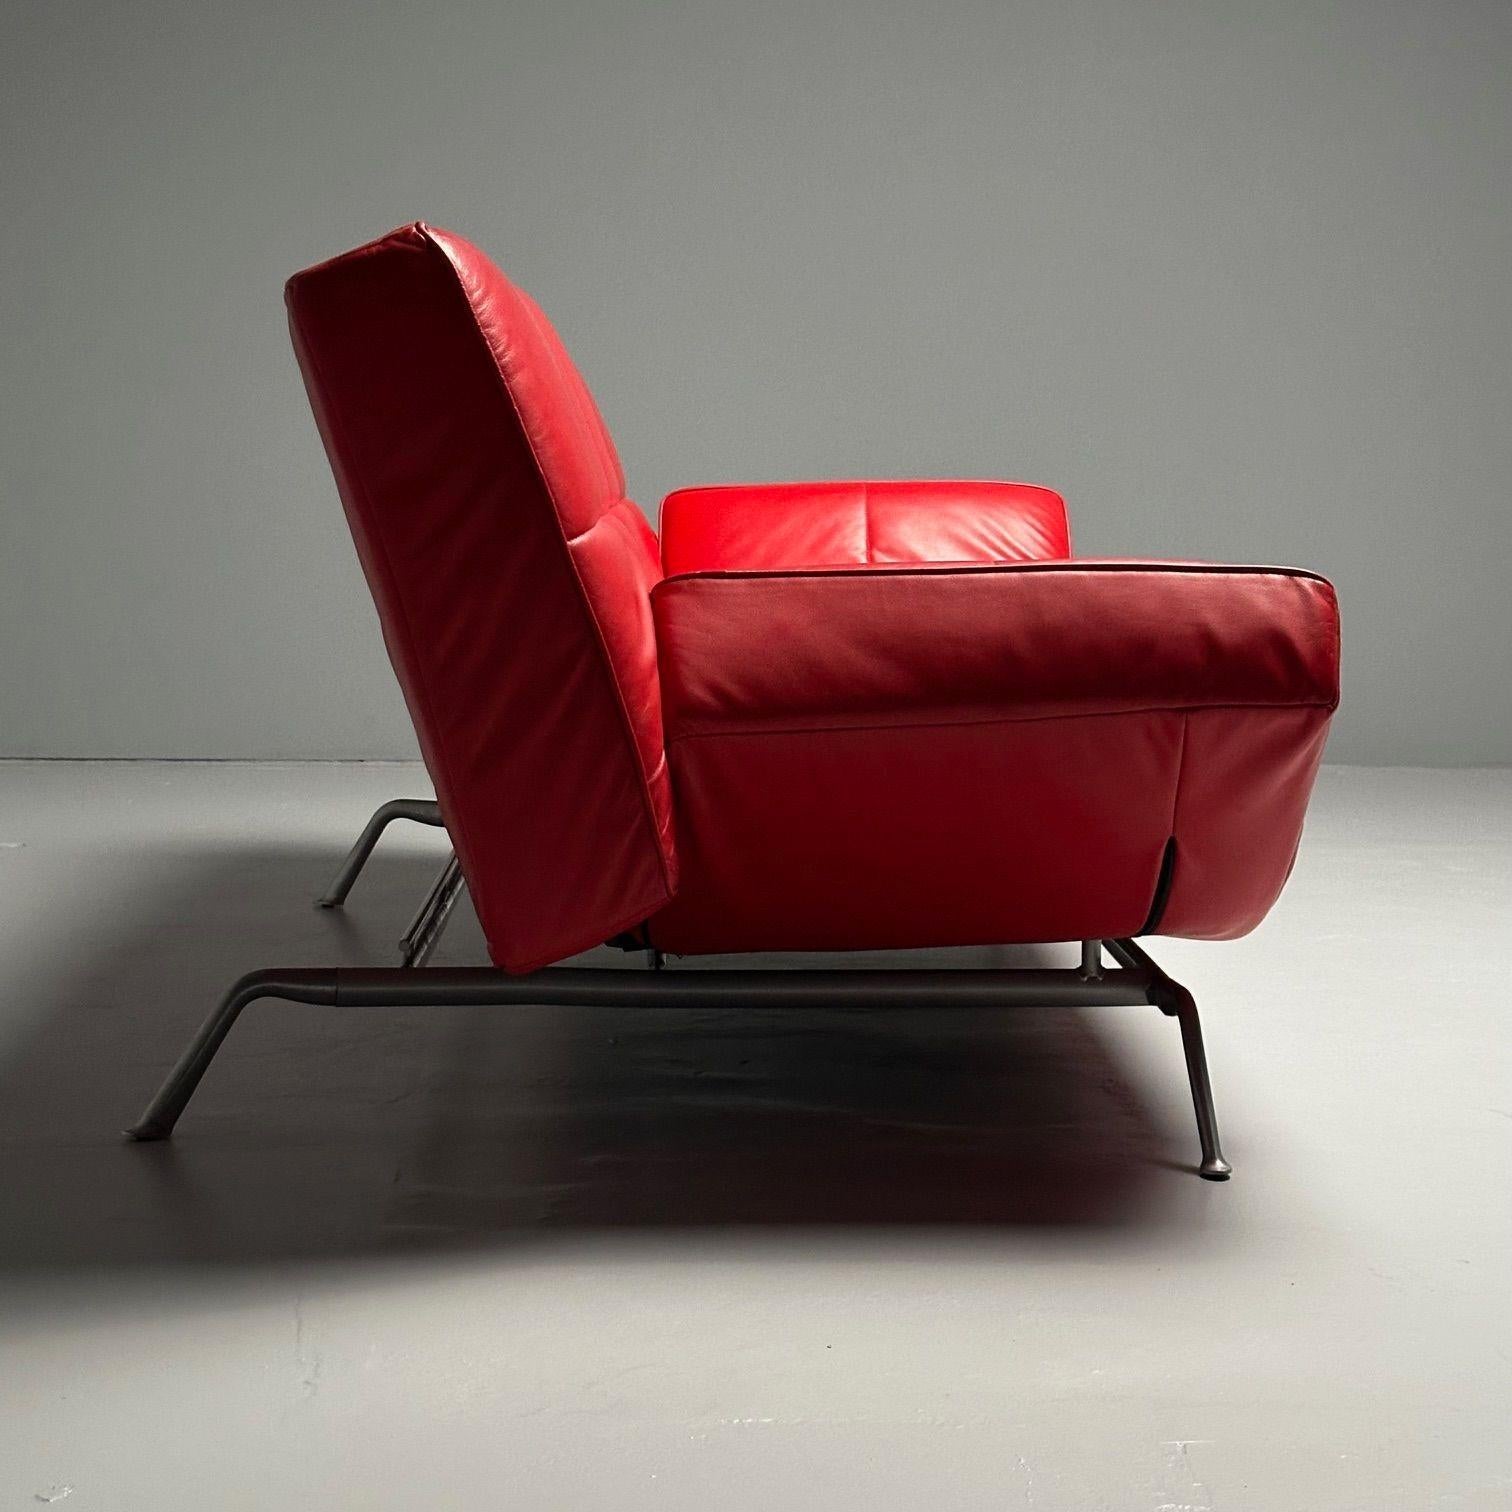 Pascal Mourgue, Ligne Roset, Smala Adjustable Daybed, Sofa, Red Leather, France 11